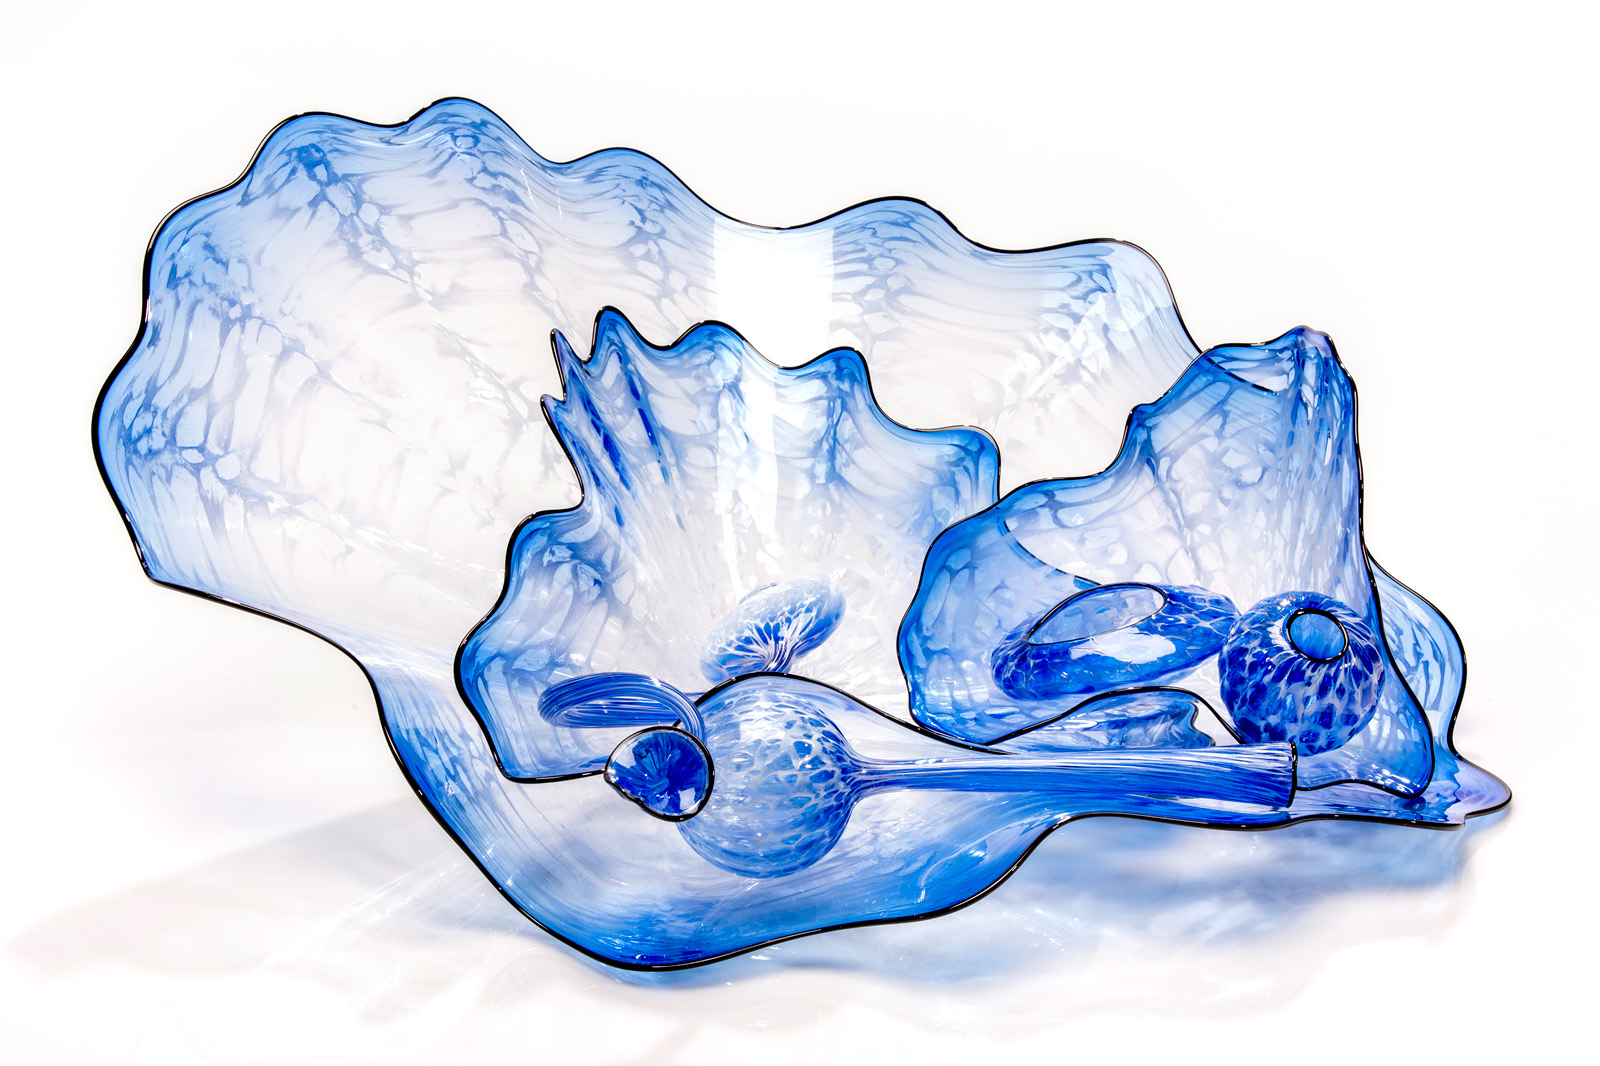 Cerulean Lace Persian Set with Obsidian Lip Wraps, 2016 by Dale Chihuly